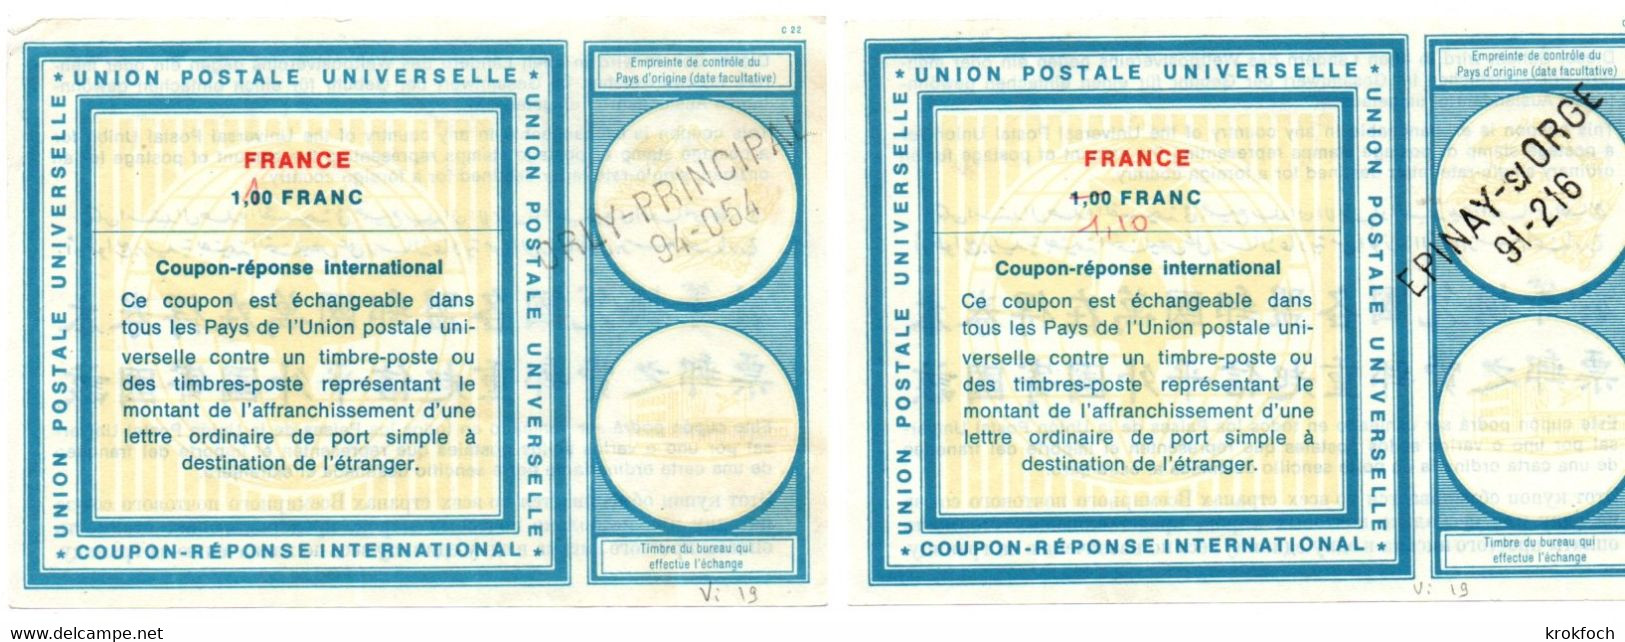 France - 2 Coupon-réponse Type Vienne 19  - Griffe Orly Principal & Epinay-s/-Orge - IAS CRI IRC - Antwoordbons